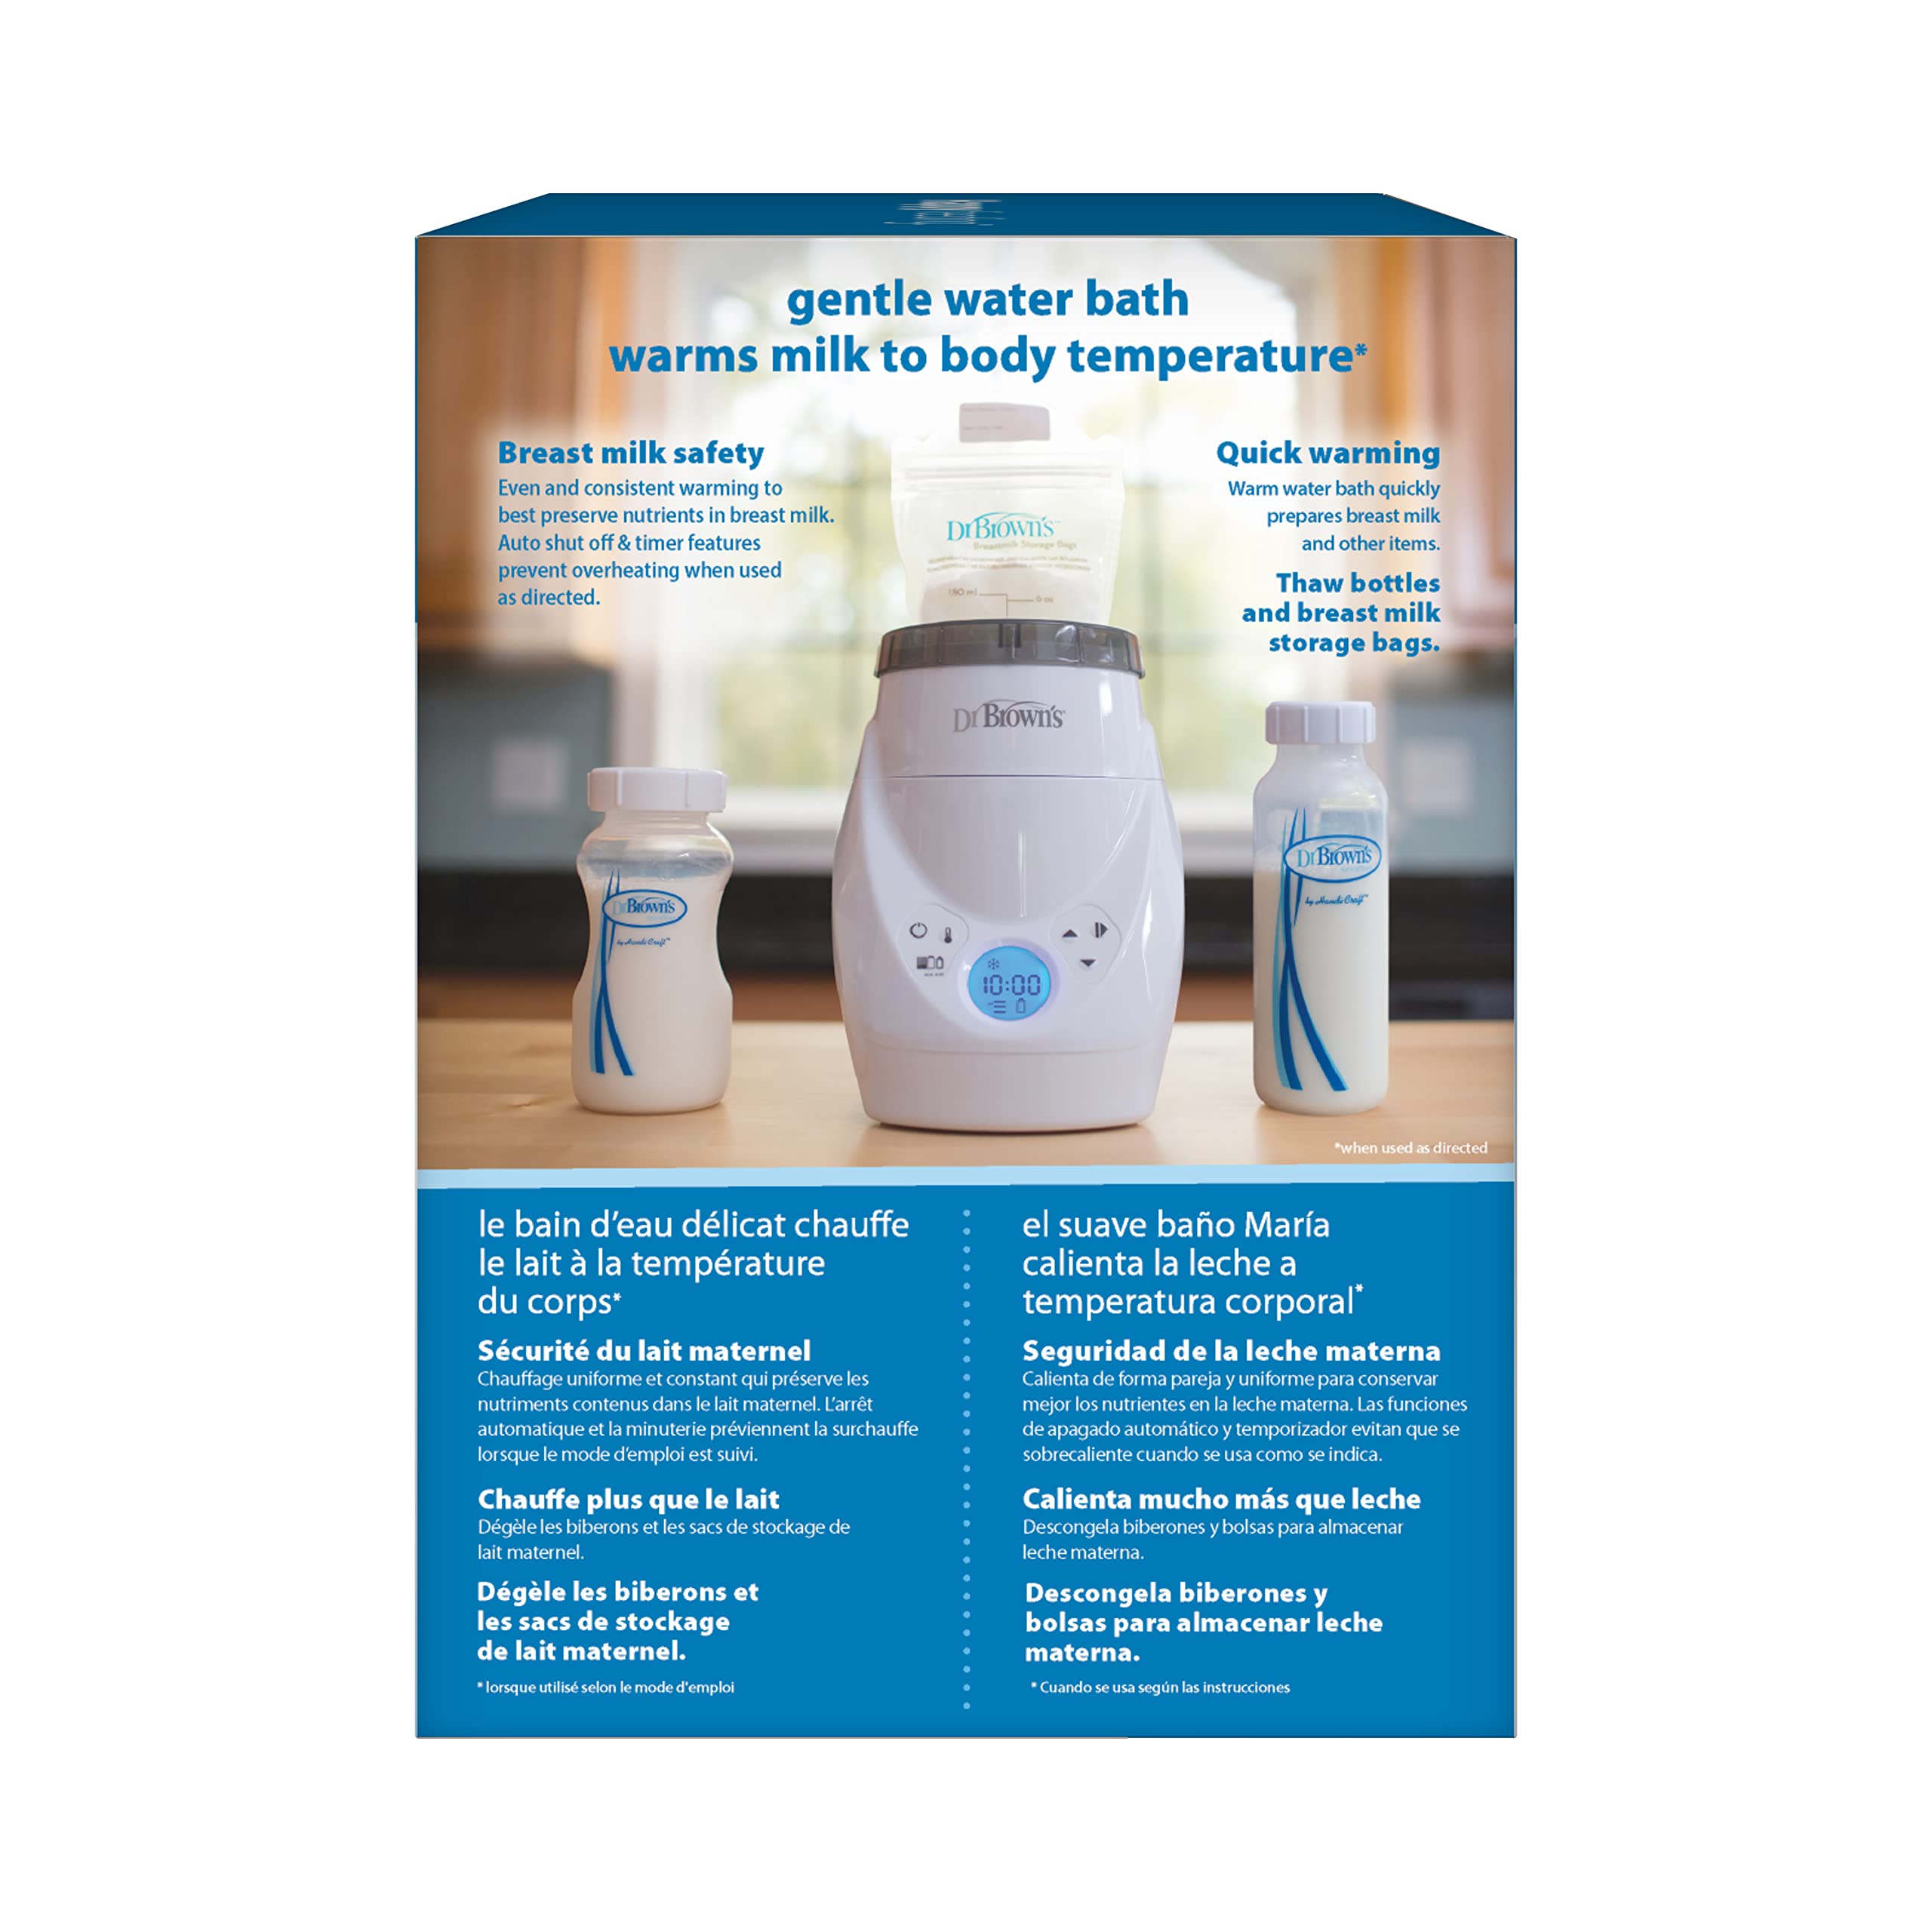 Dr. Brown’s Natural Flow MilkSPA Breastmilk and Bottle Warmer with Even and Consistent Warming